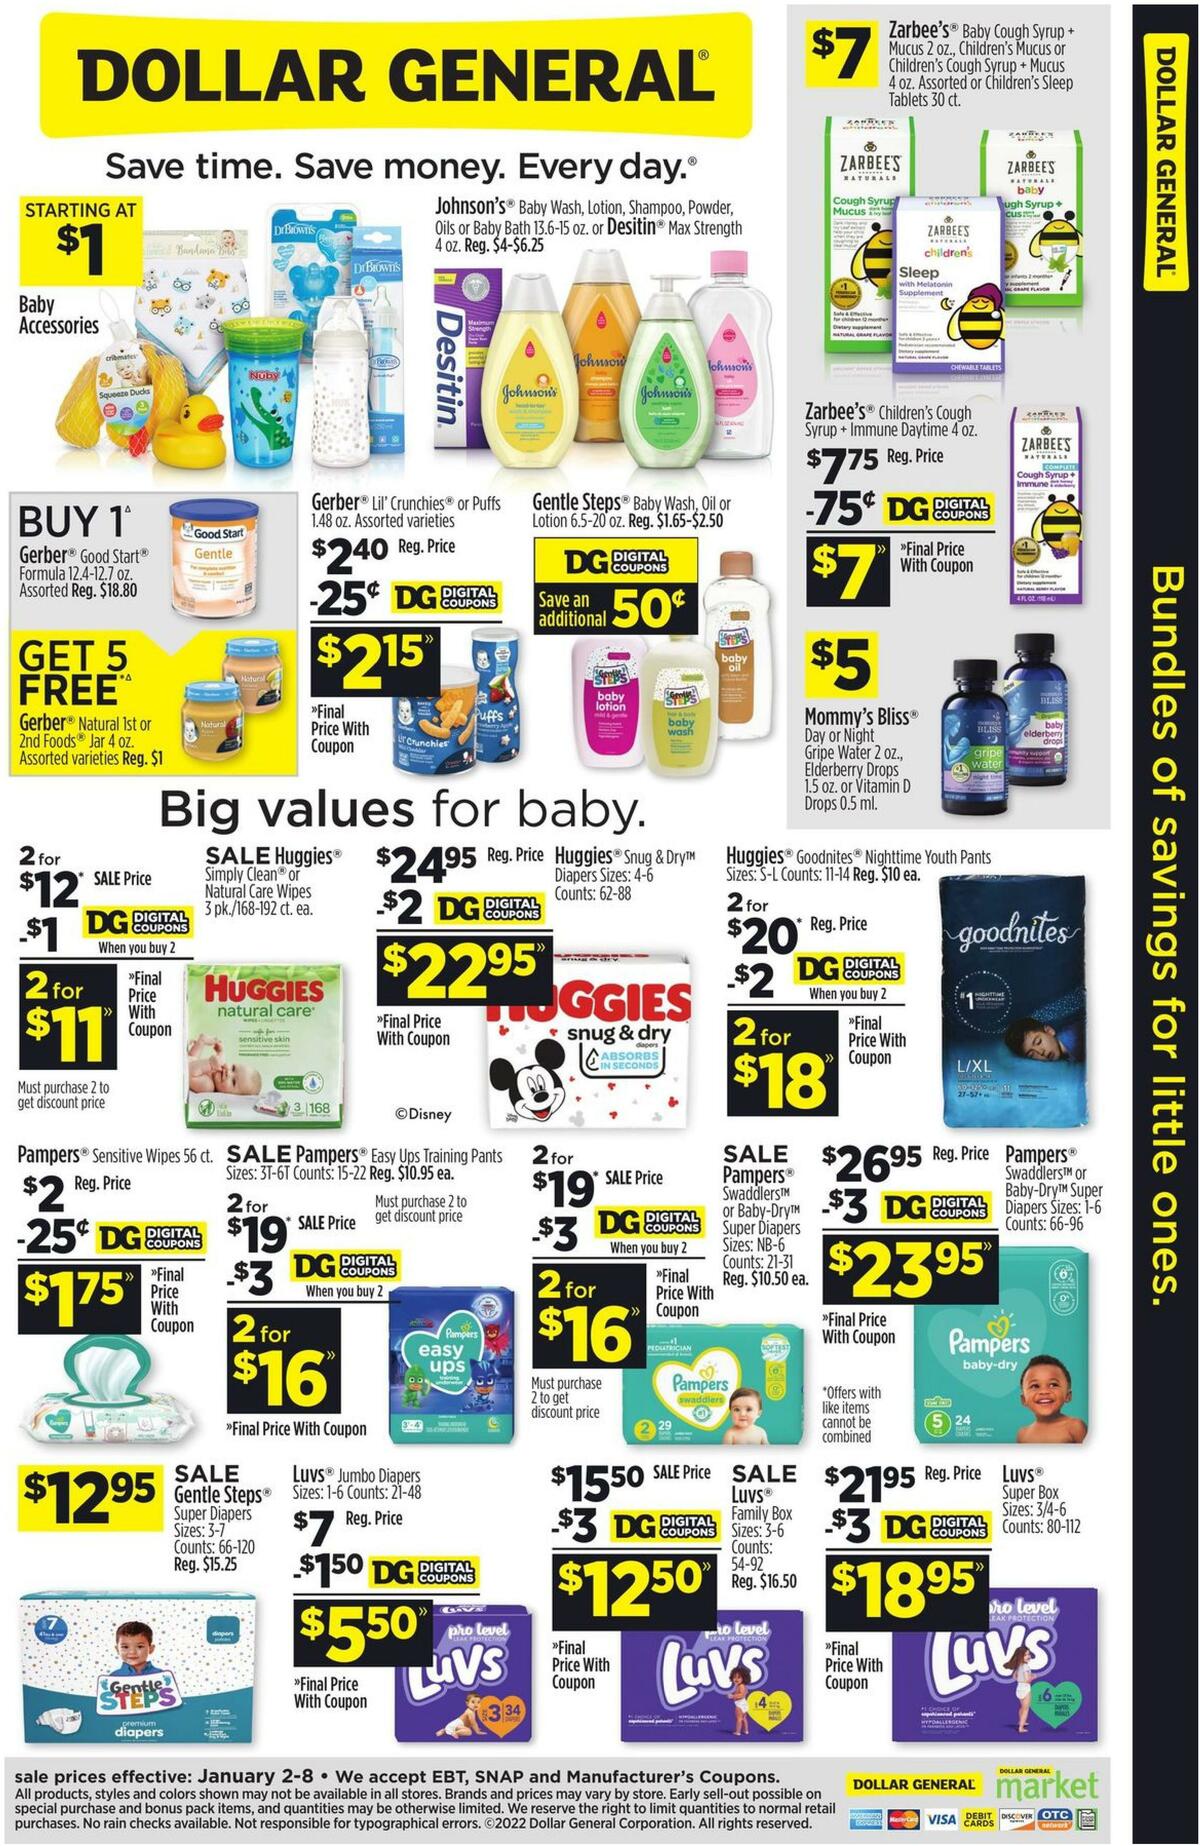 Dollar General Bundles of Savings for Little Ones Weekly Ad from January 2